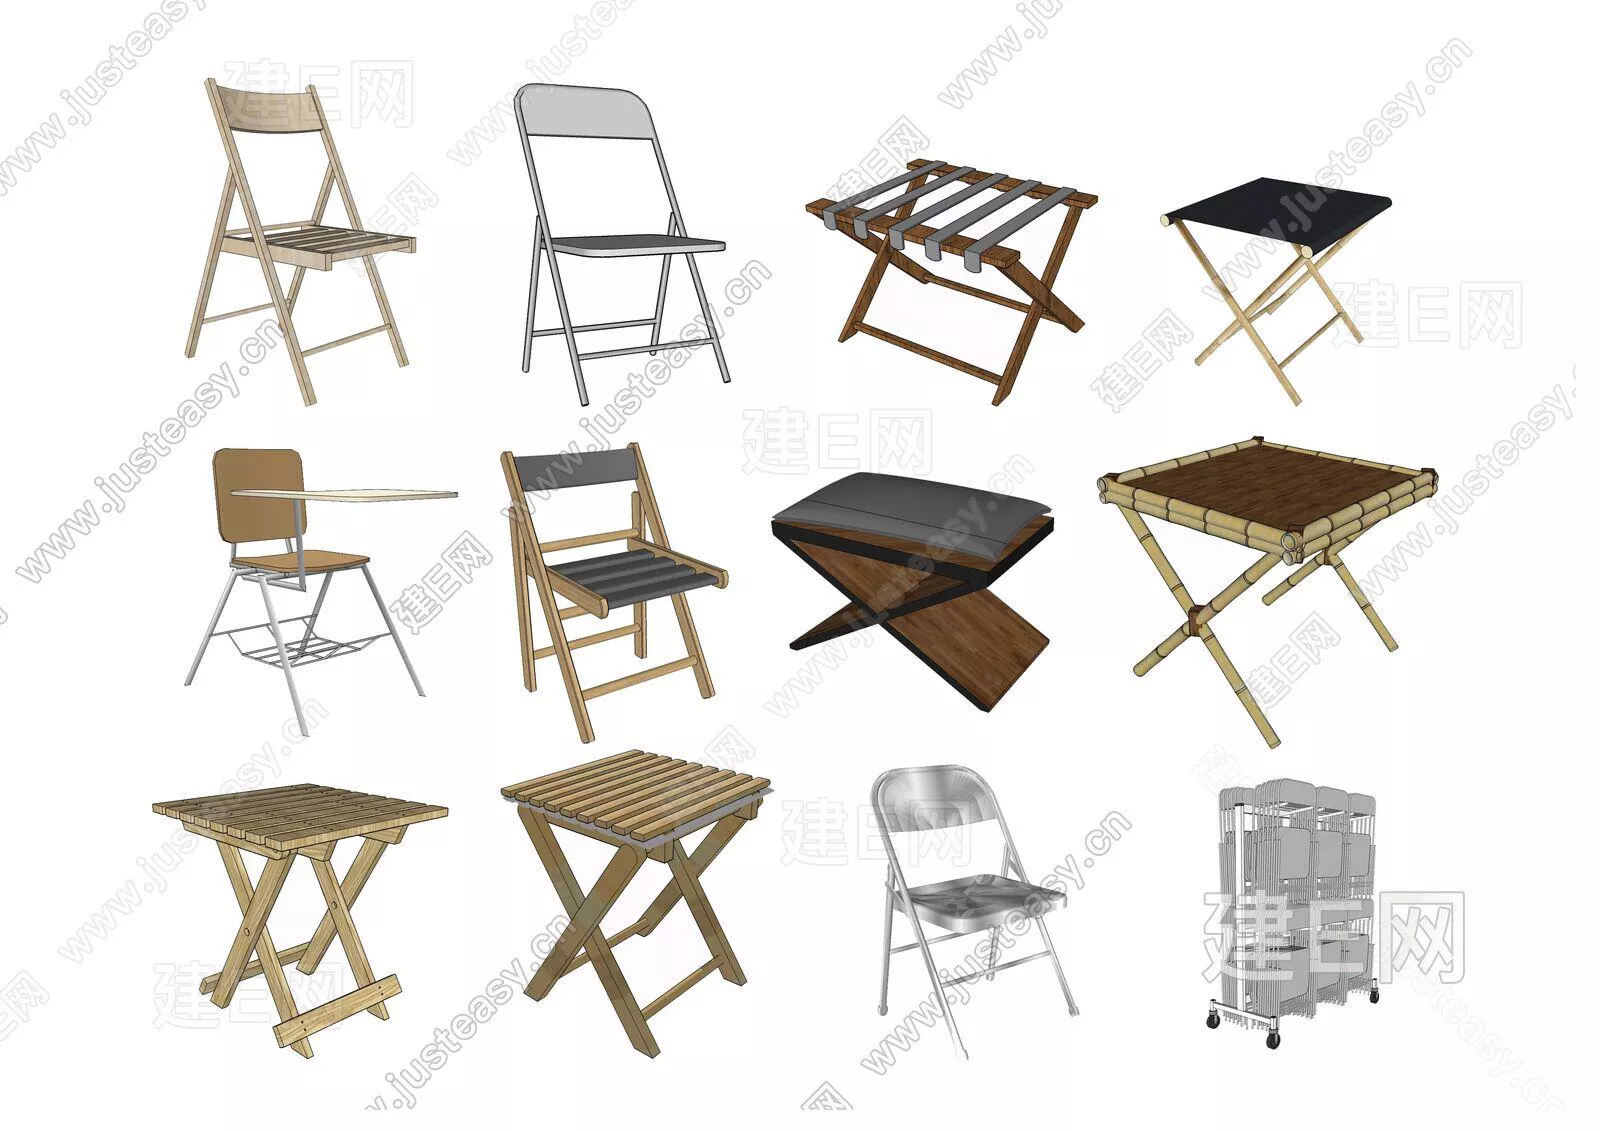 CHINESE OFFICE CHAIR - SKETCHUP 3D MODEL - VRAY - 110051382